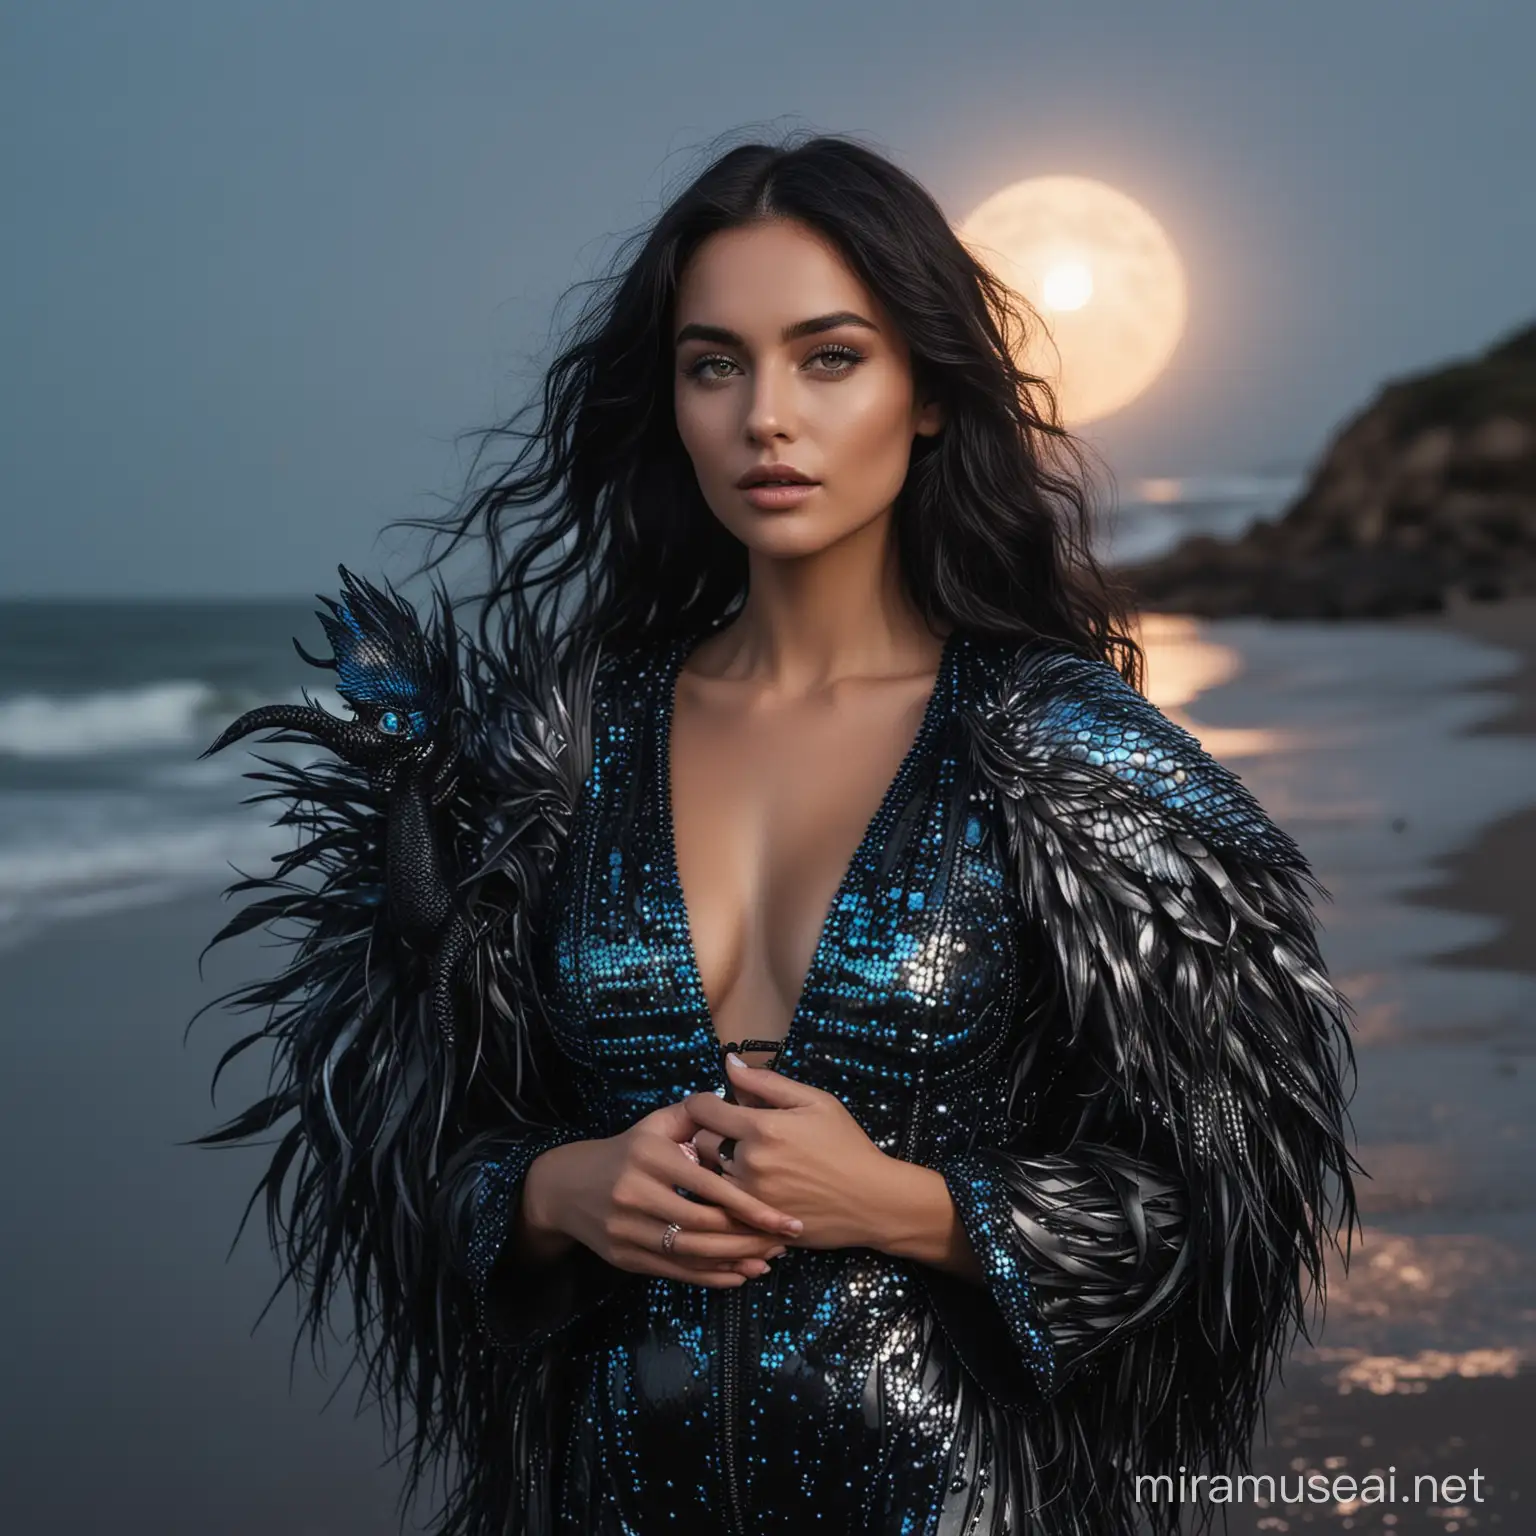 A gorgeous glowing woman model holding a metallic black blue tiny dragon, pearl iridescent colors, wearing metallic black shiny Schiapirelli inspired couture feather jacket, silver shiny crone, water are extreme long black hair, wes anderson color palette, dark night with gigantic moon beach background, 35mm photography